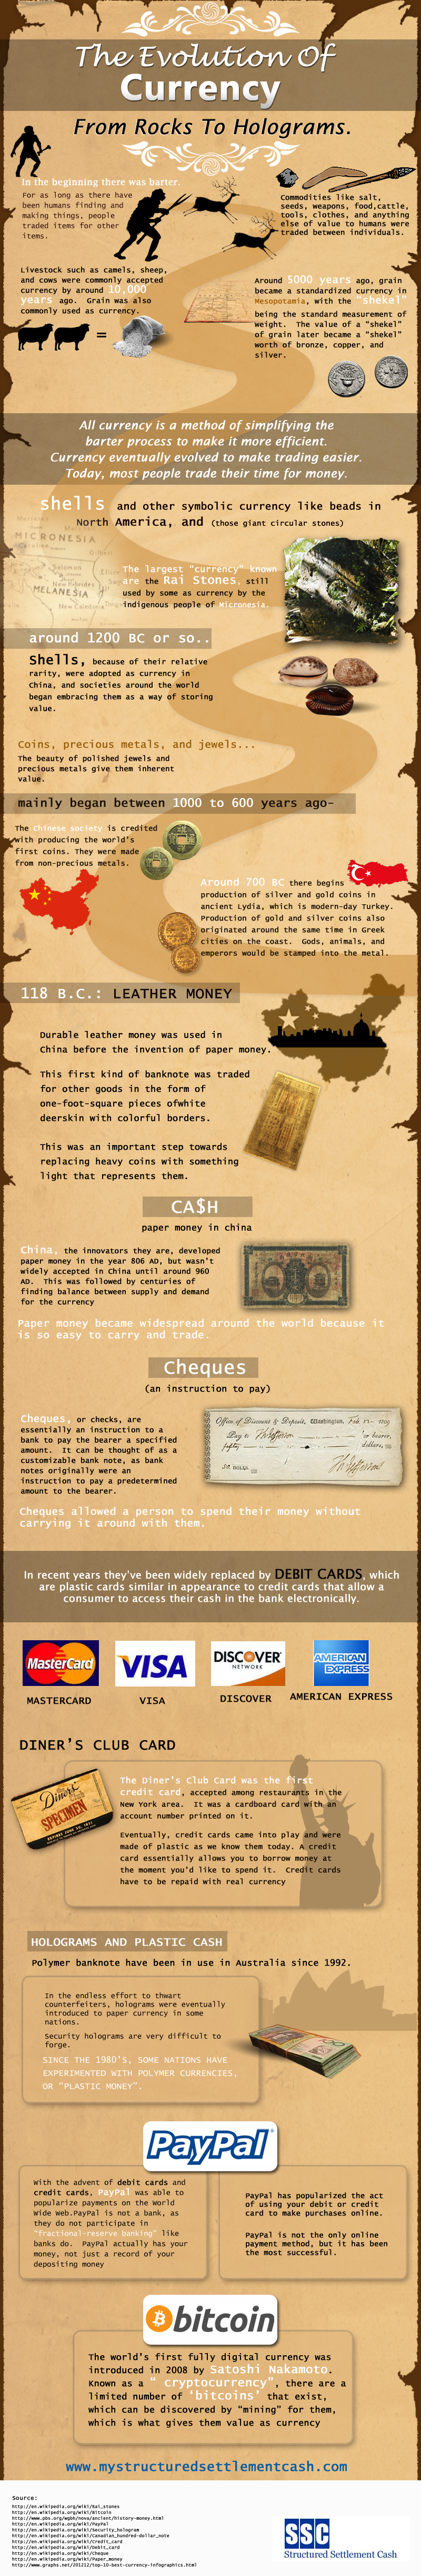 The Evolution of Currency